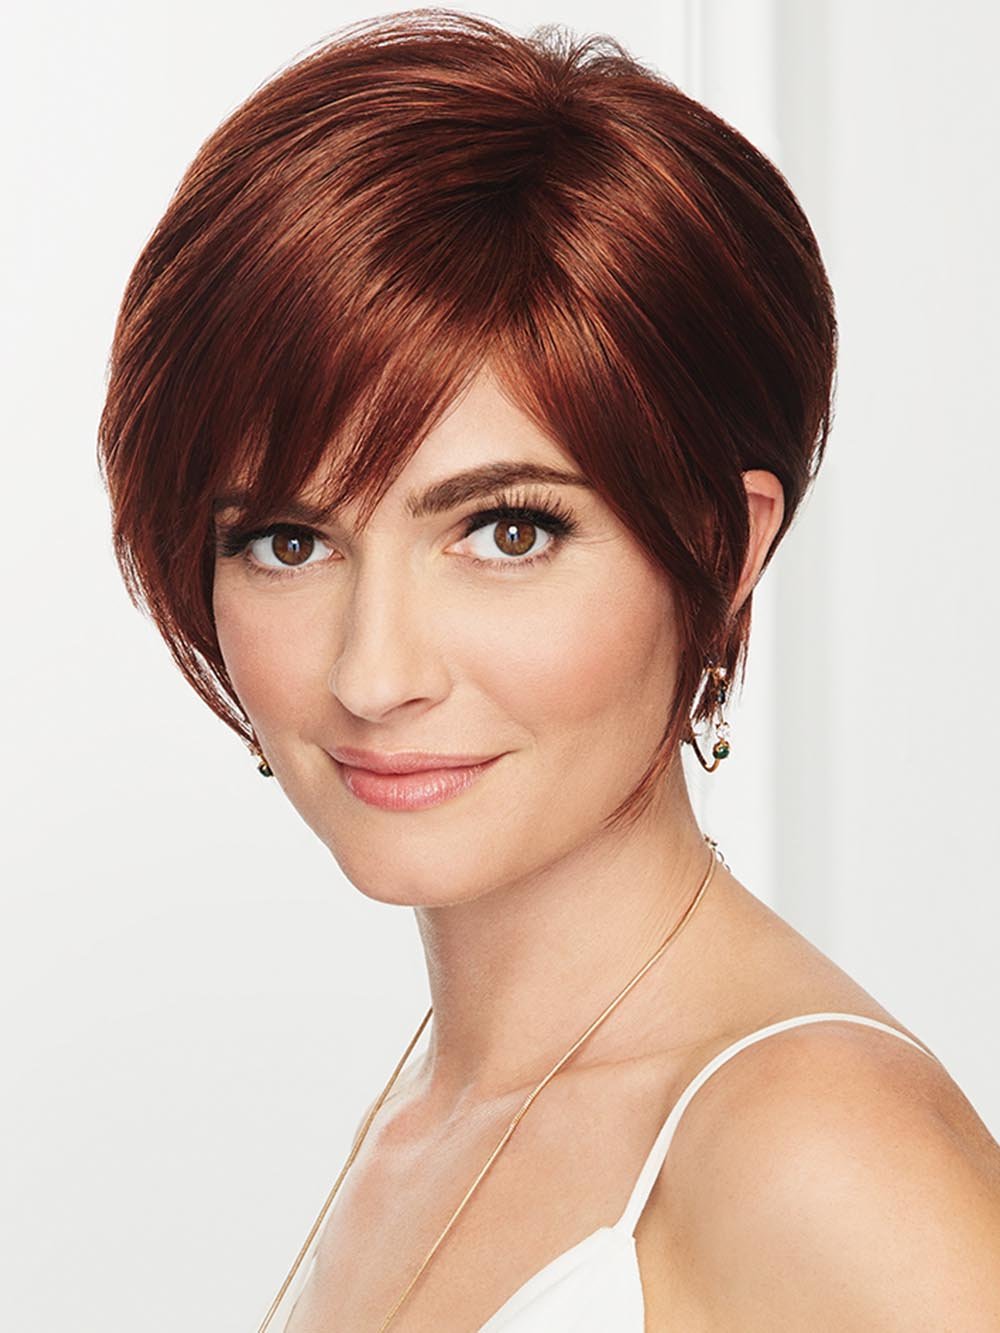 A side-swept bang, face-framing layers with tapered edges